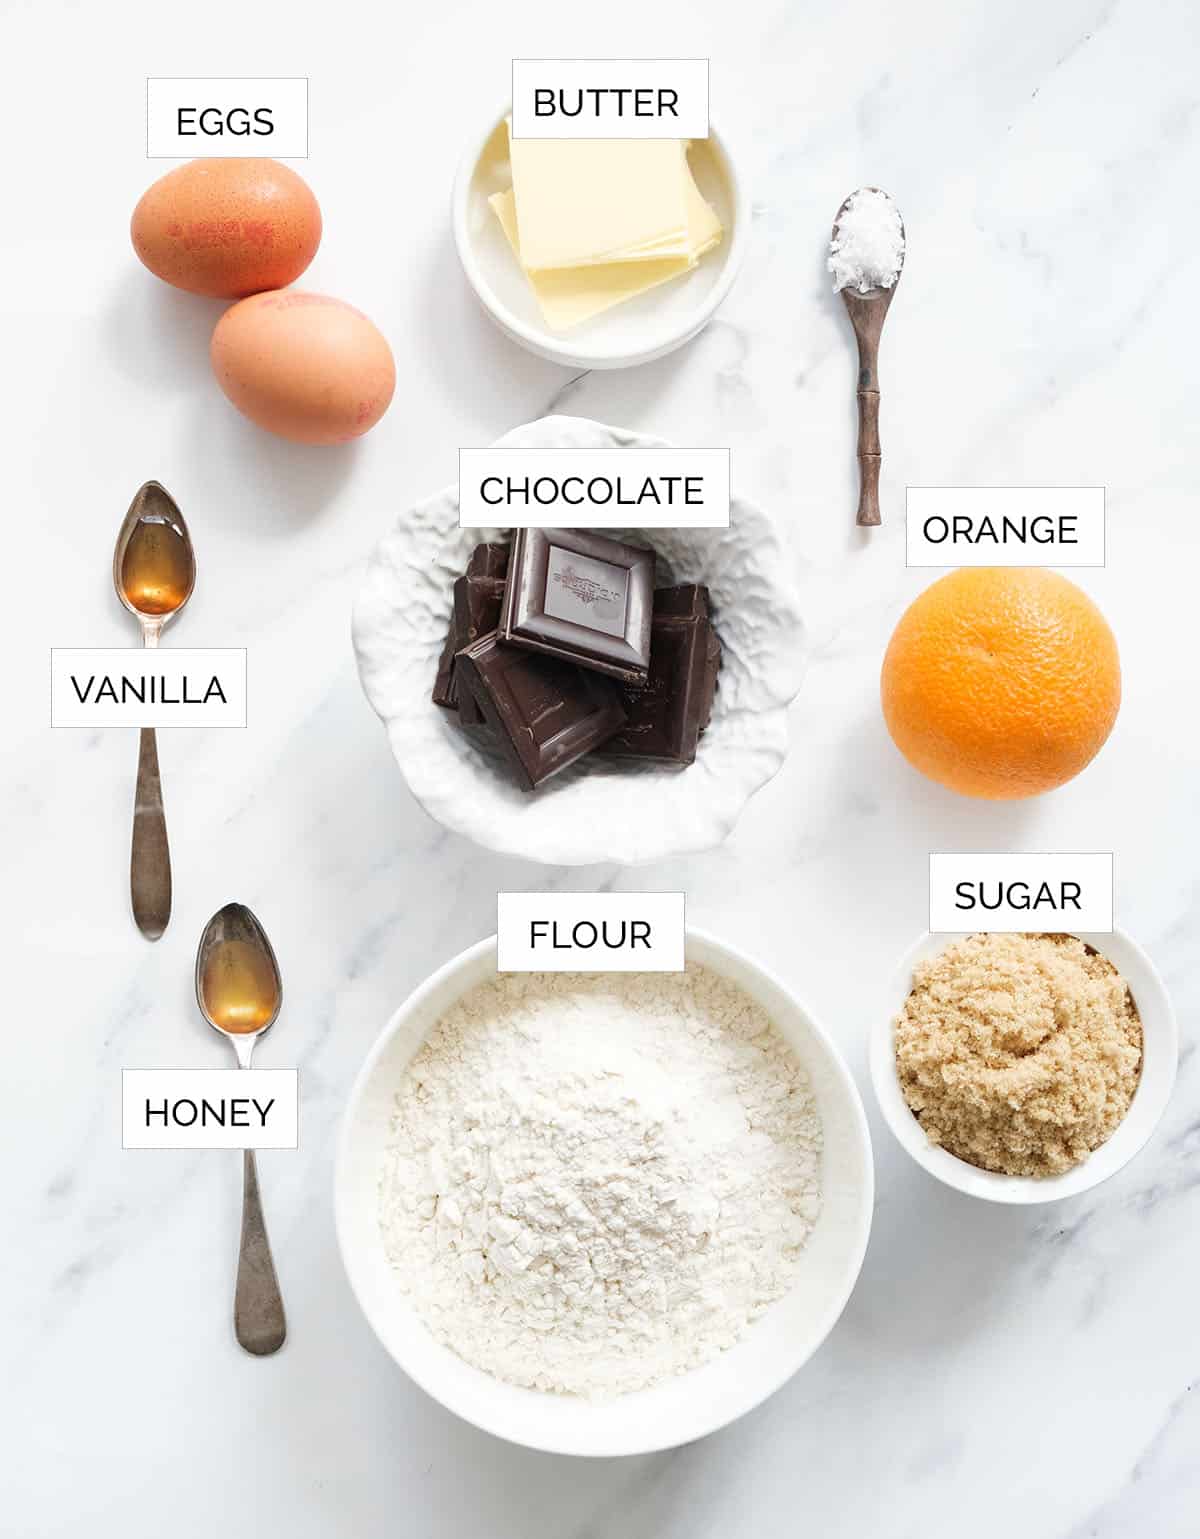 Top view of the ingredients to make chocolate biscotti over a white background.